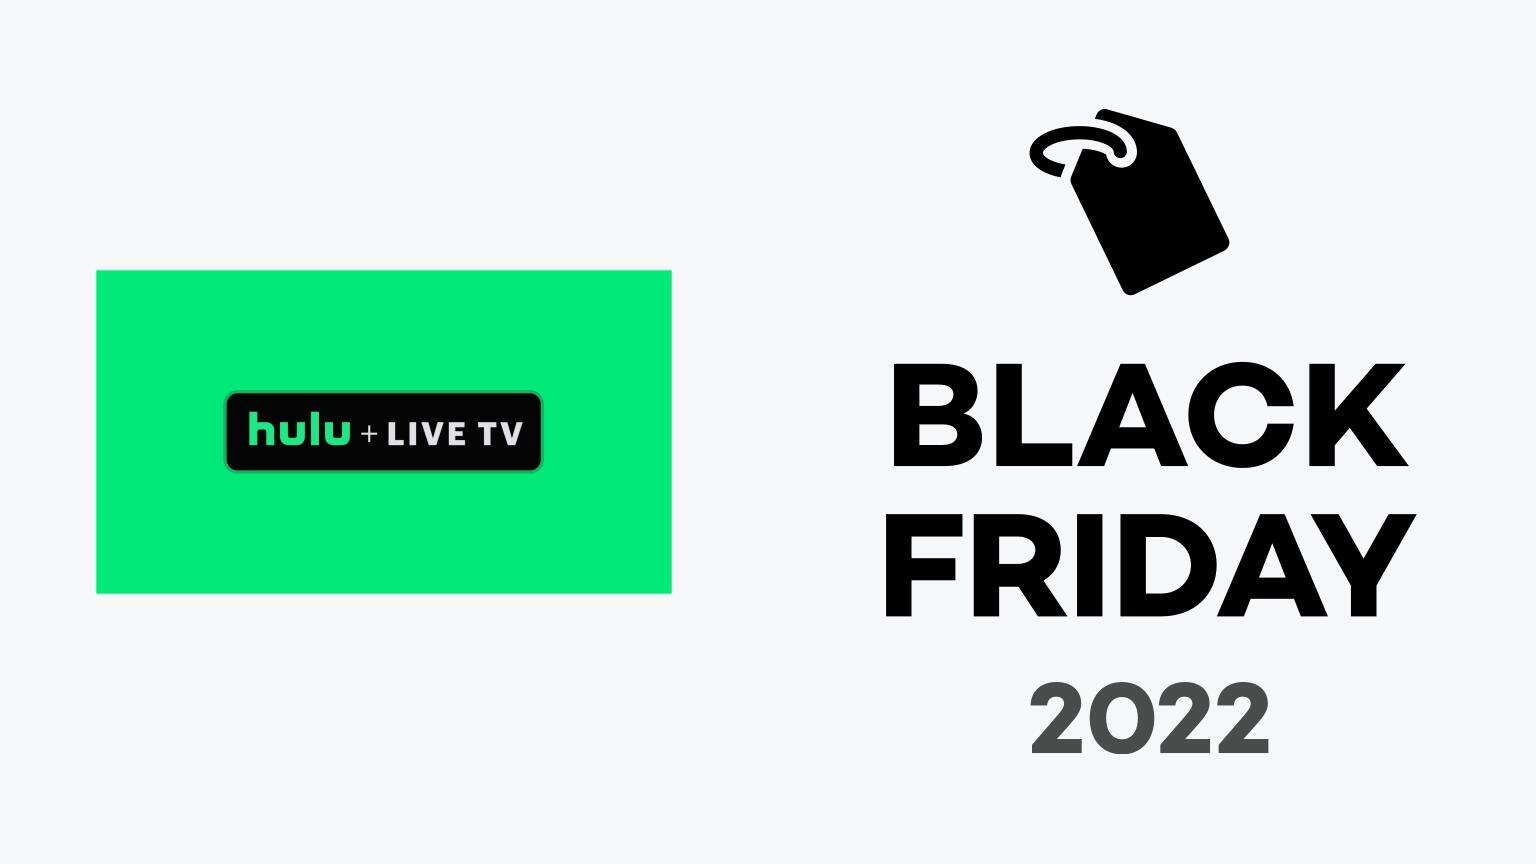 Hulu + Live TV Black Friday & Cyber Monday 2022 Deals Can You Save on